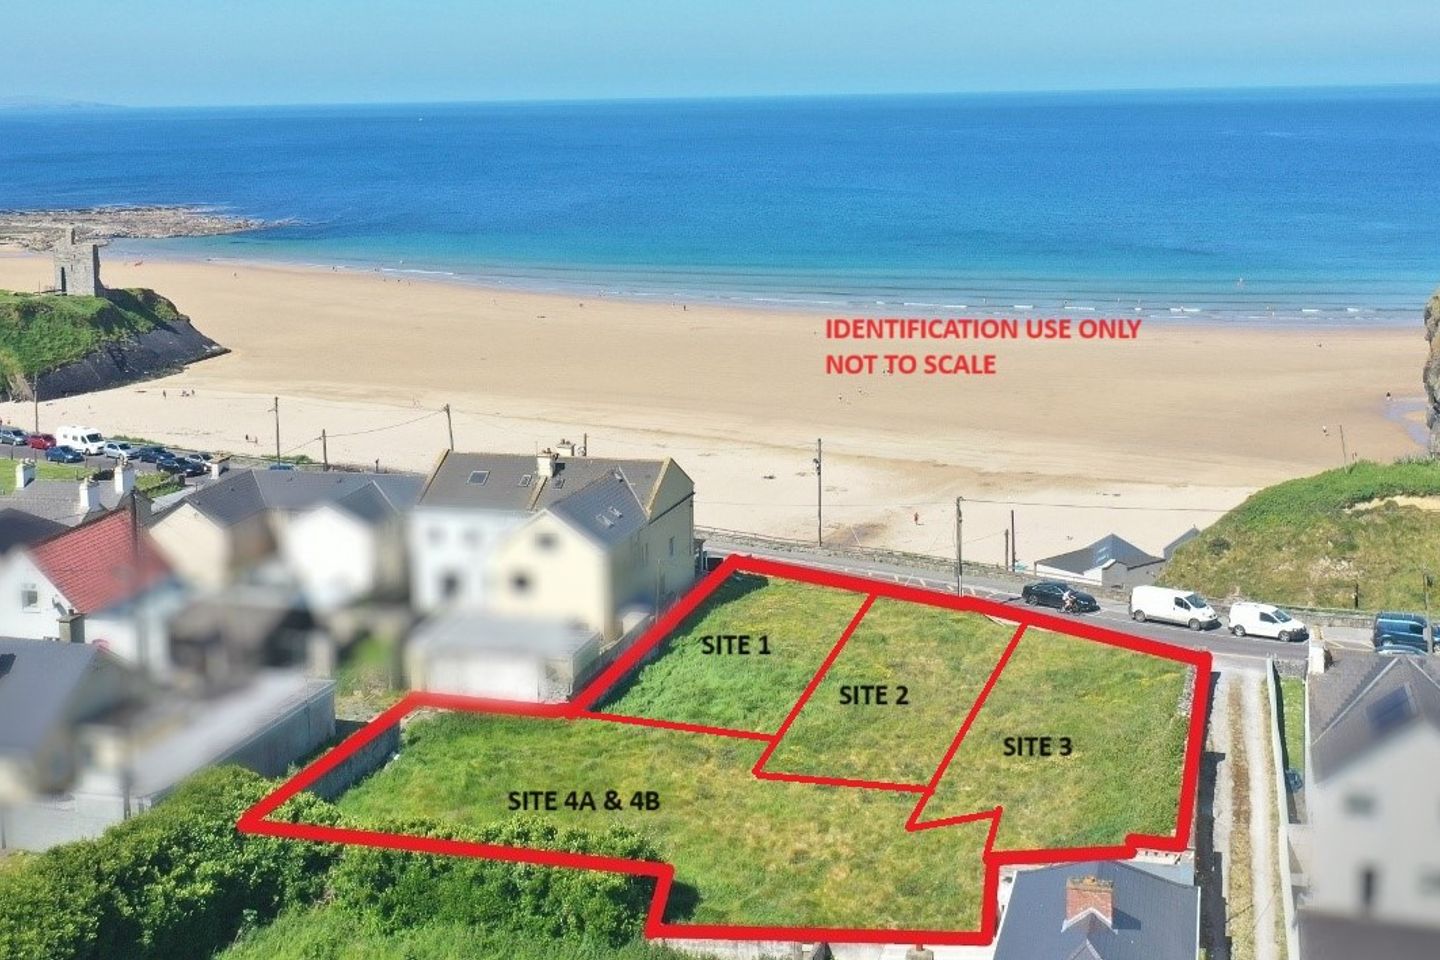 Sites at Cliff Road, Ballybunion, Co. Kerry